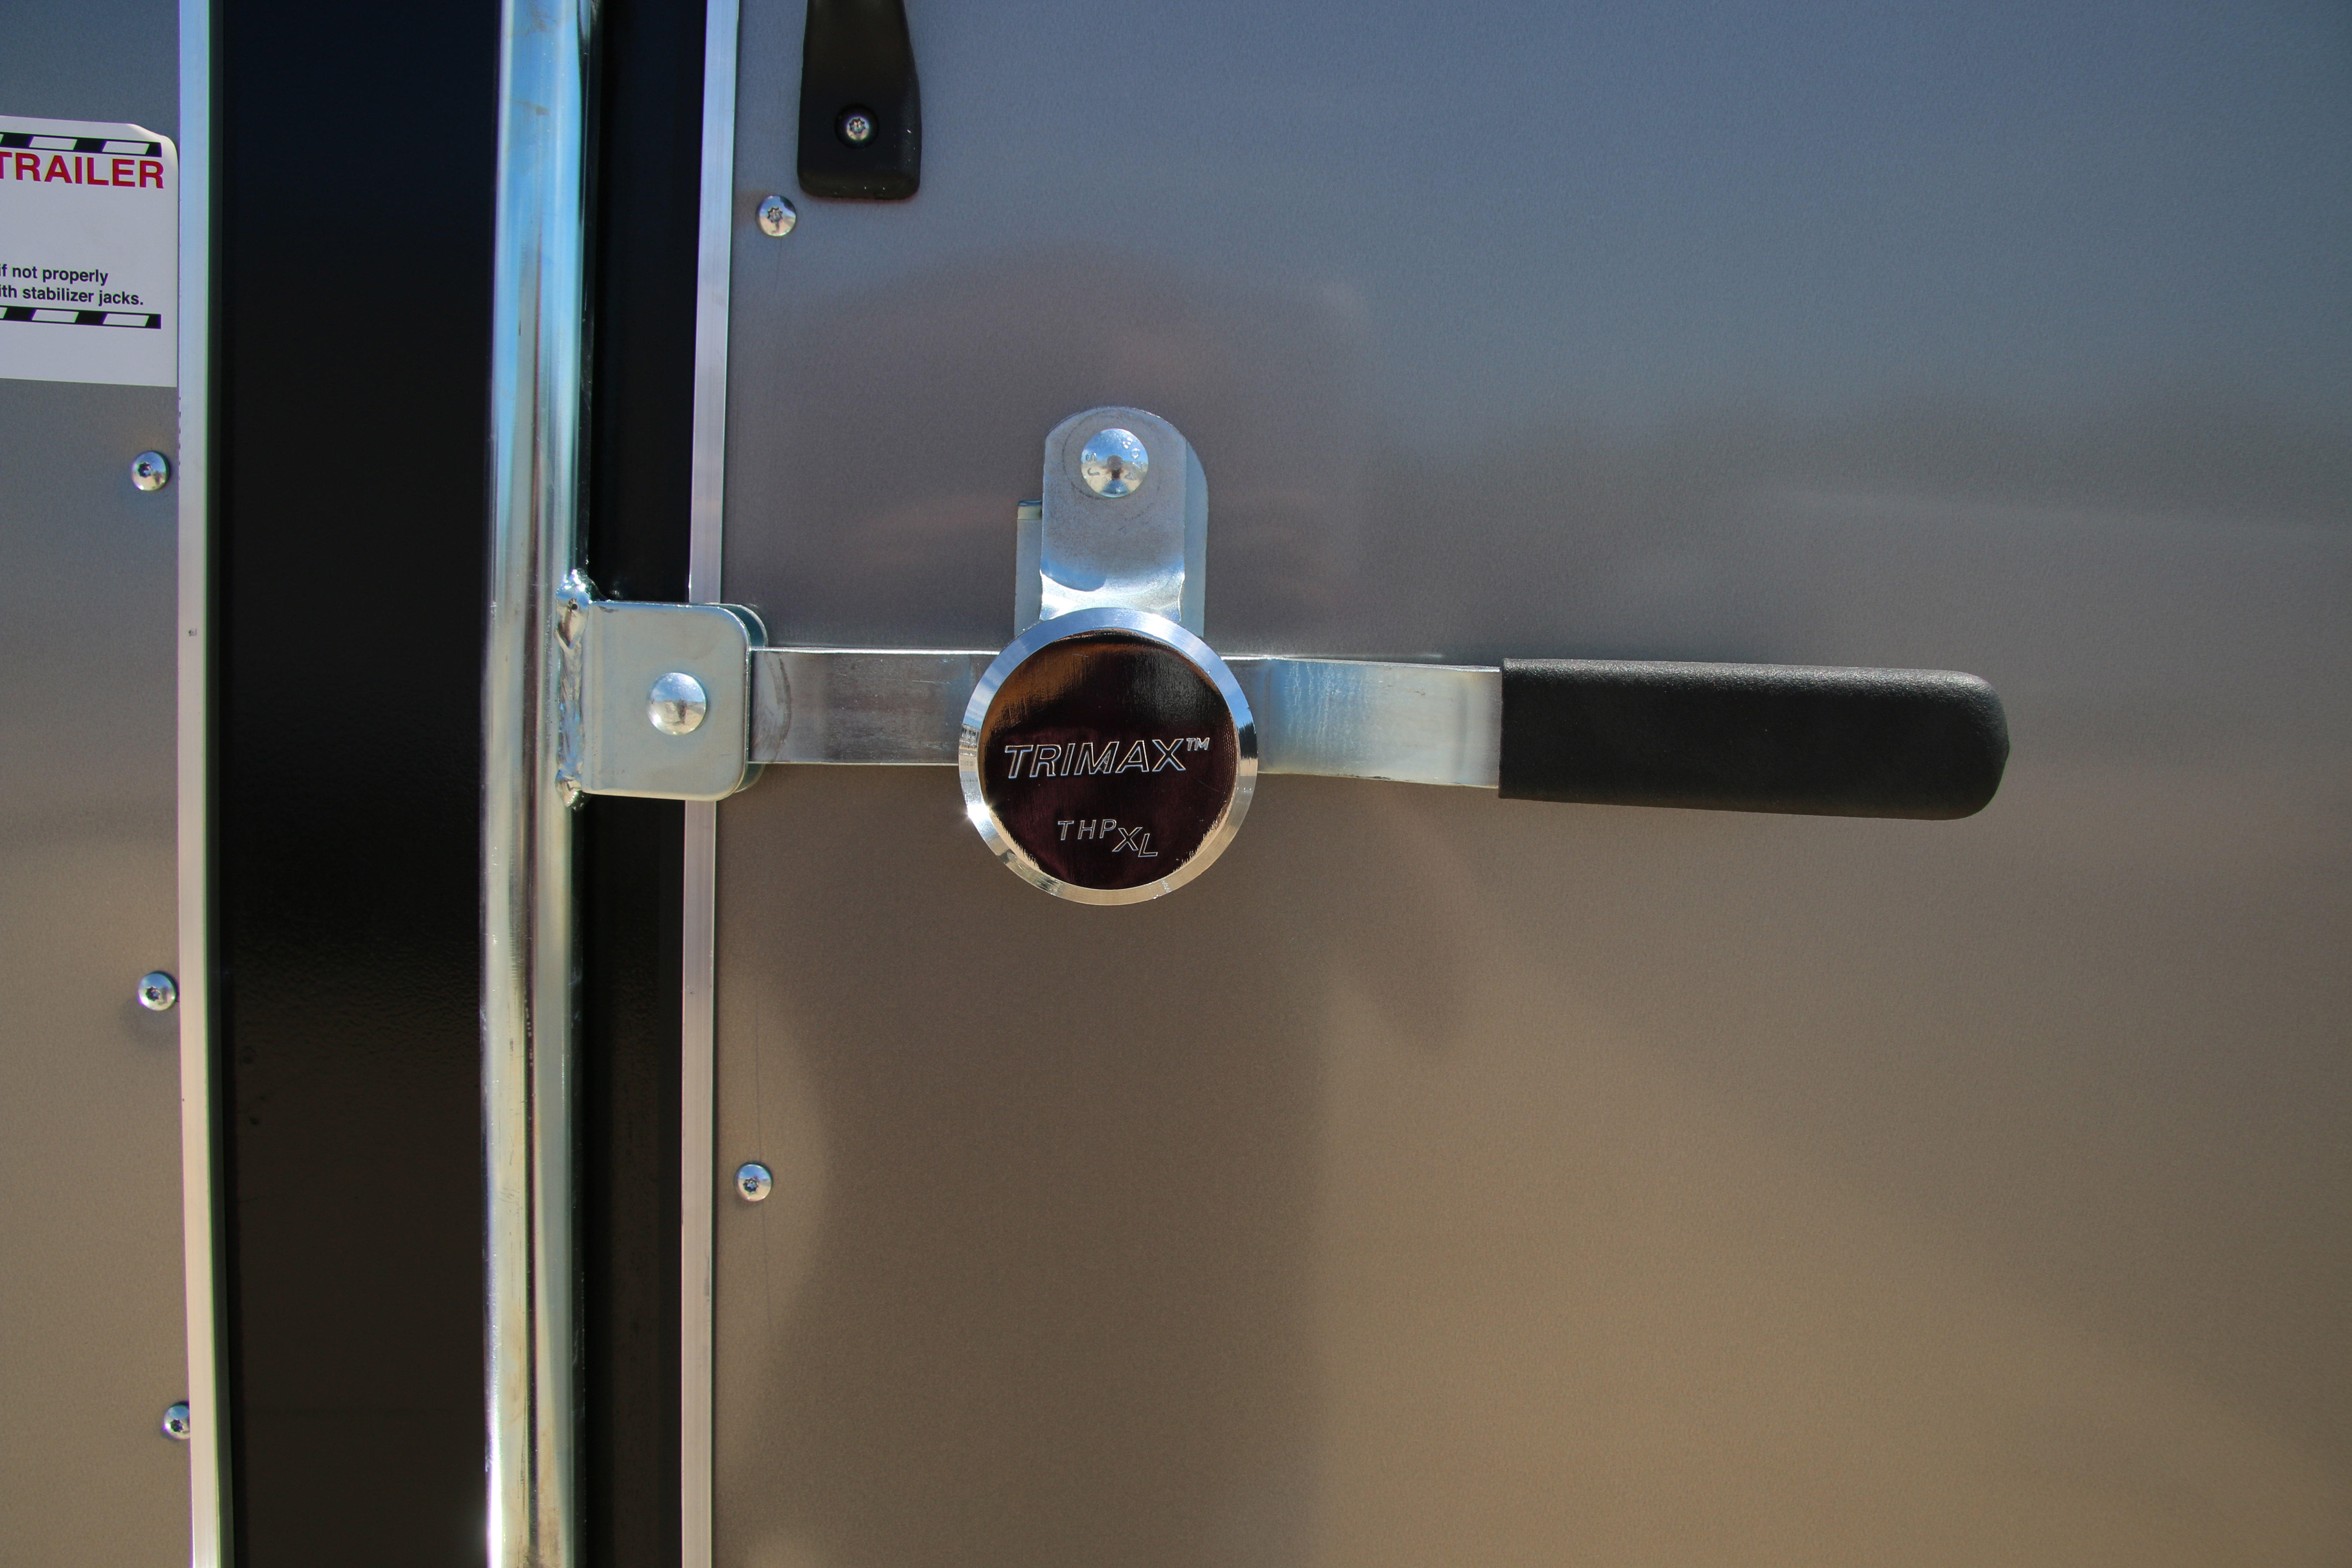 Cambar with Lock TrailersPlus Fort Collins (970)818-0670